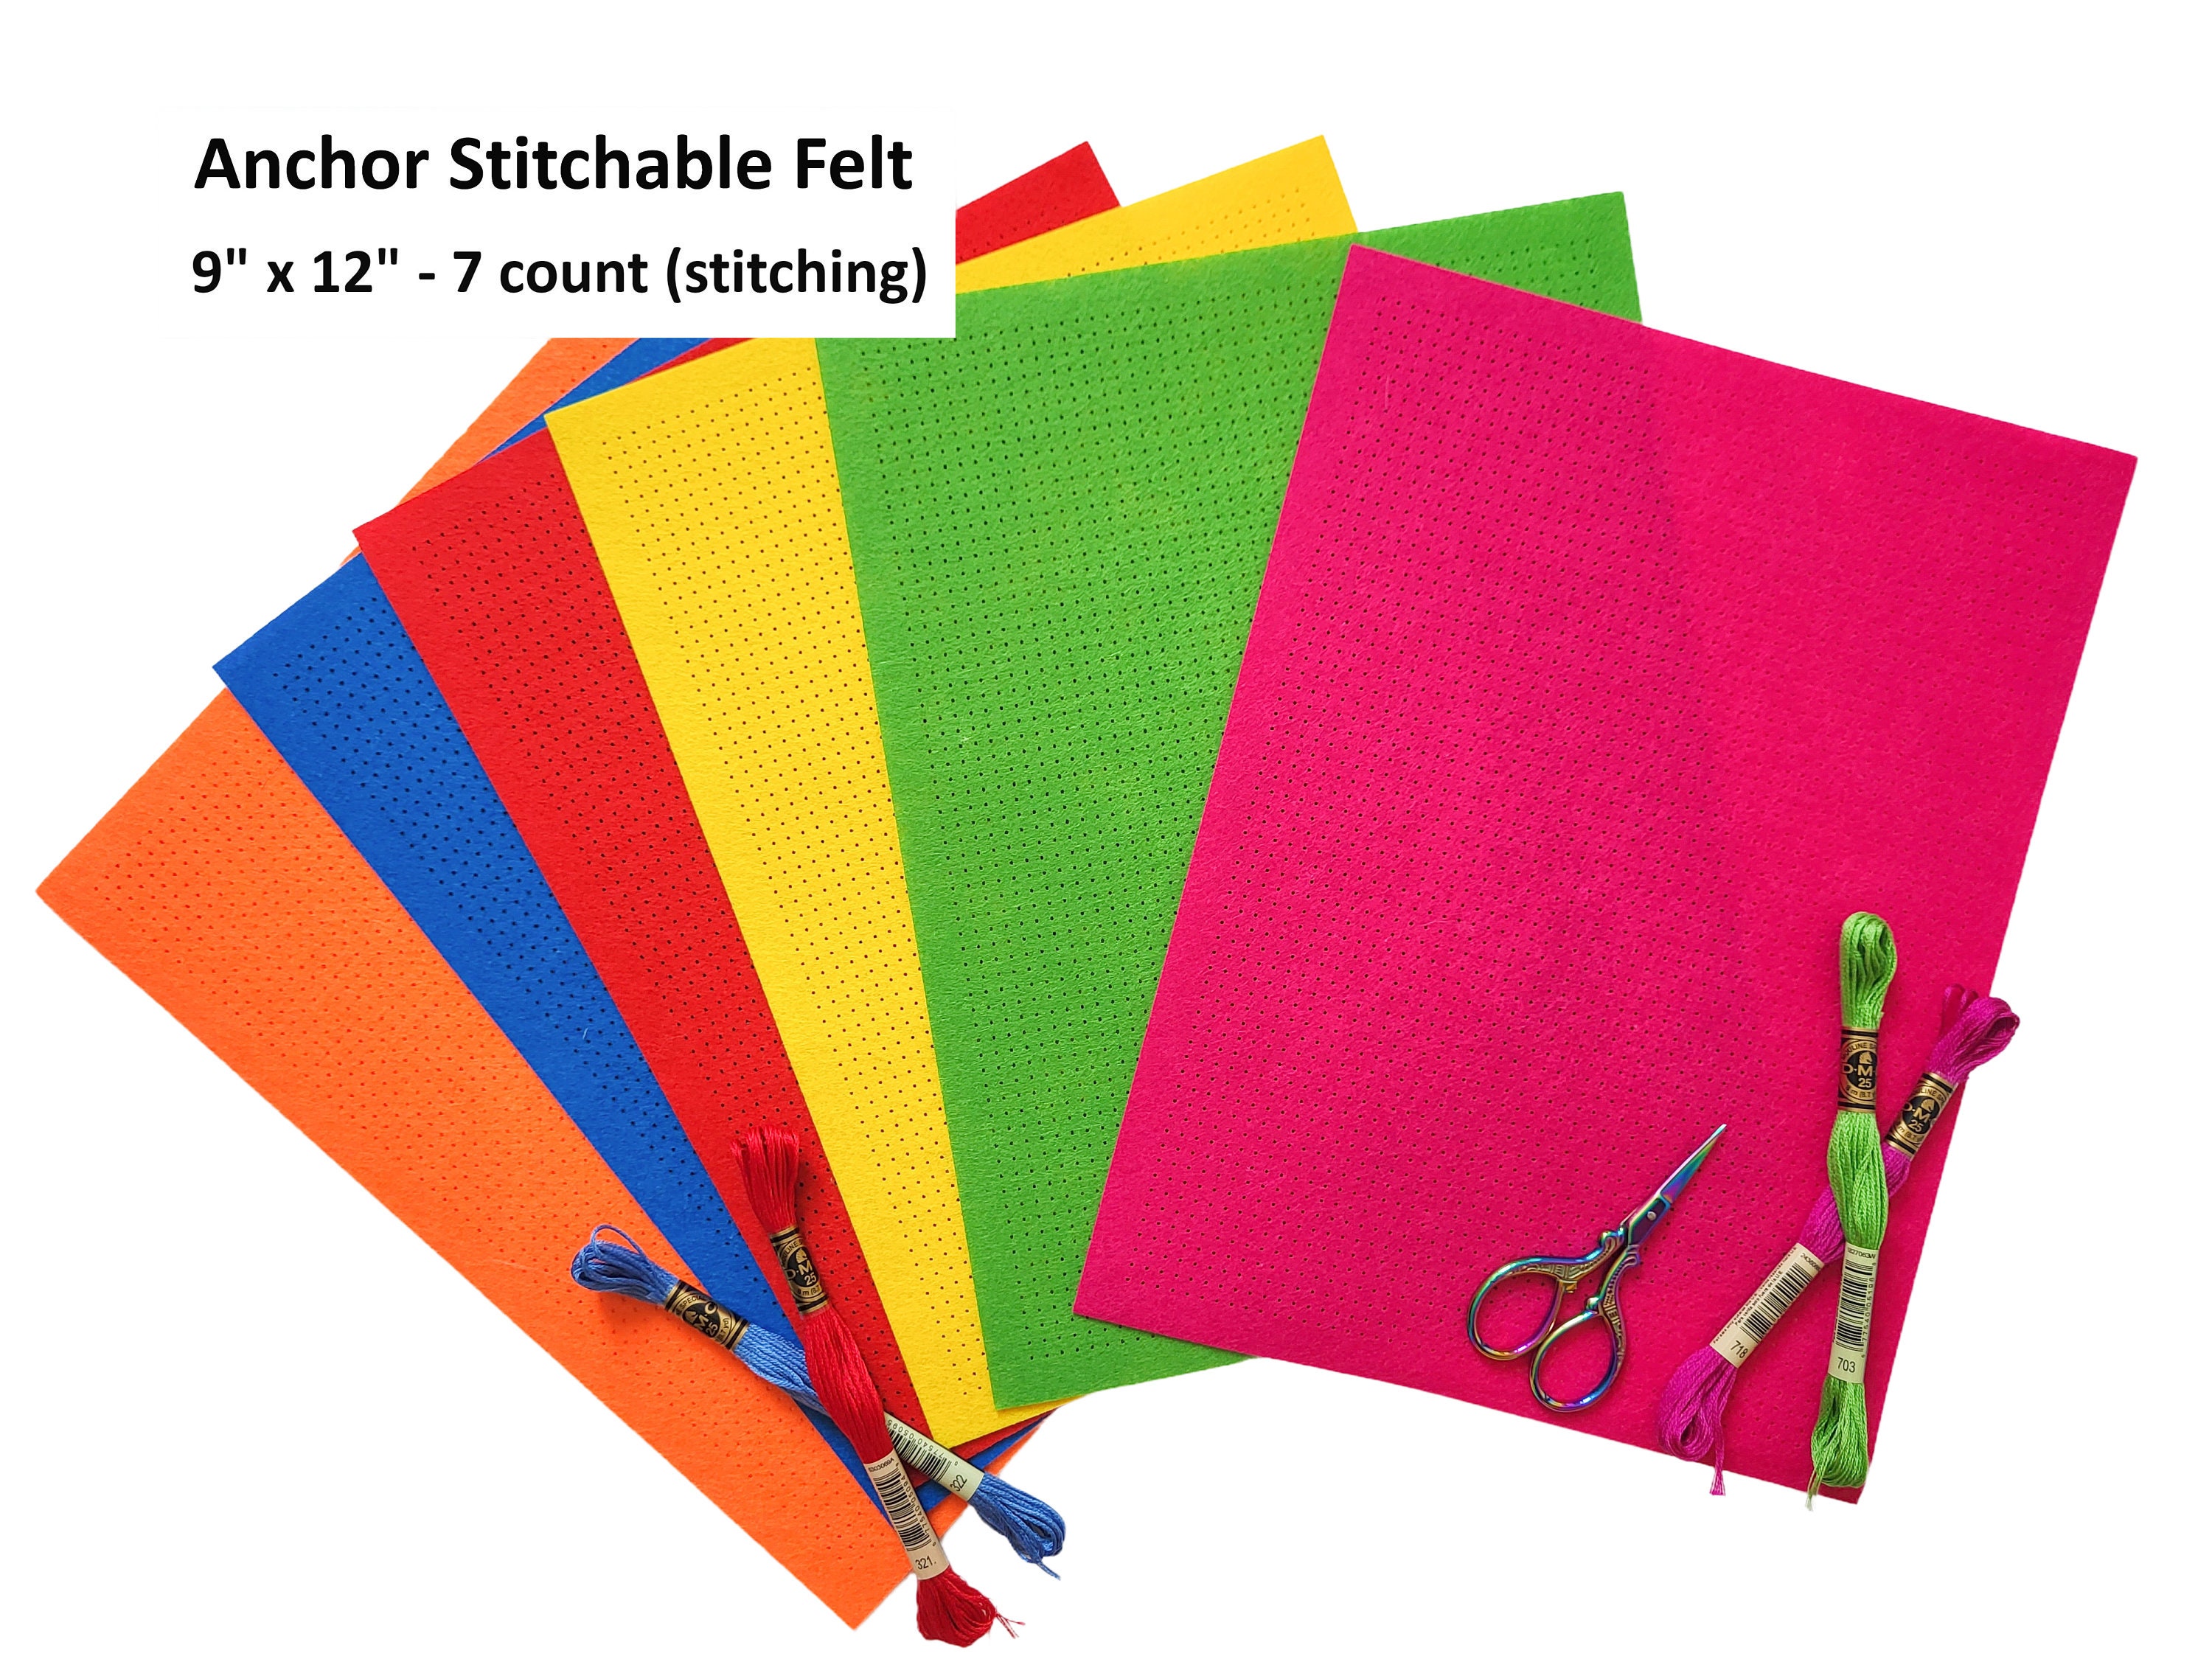 40Pcs Felt Fabric Sheets - 4x4 inch DIY Craft Felt, 1mm Thick Non-Woven  Patchwork Material for School Projects & Decoration - 40 Assorted Colors  (10 x